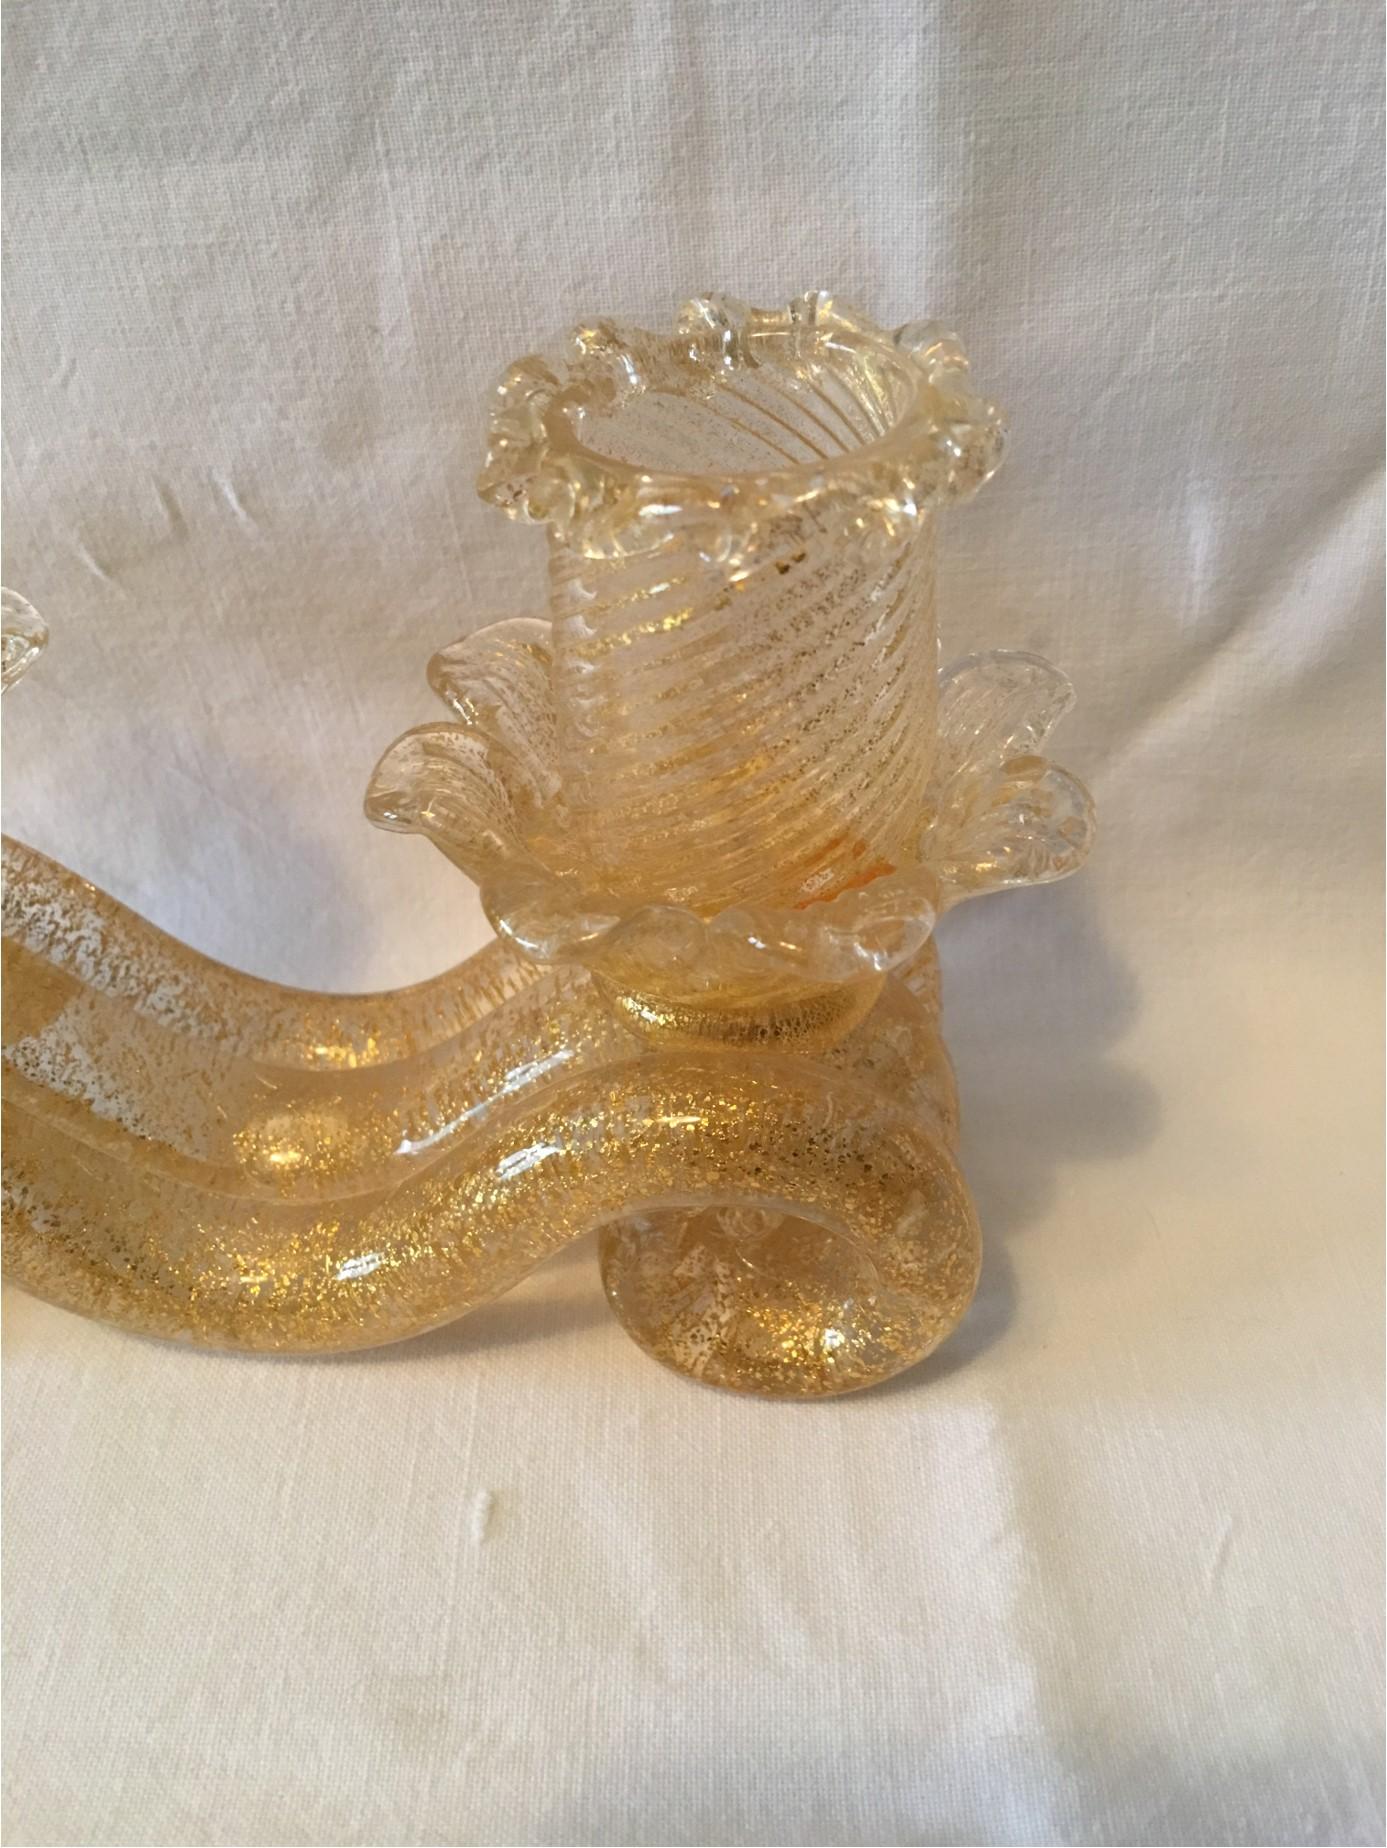 From the 1950s a wonderful Murano gold flake glass candleholder. From the styling of Barovier e Toso ! Lovely item. Molto Bello indeed!